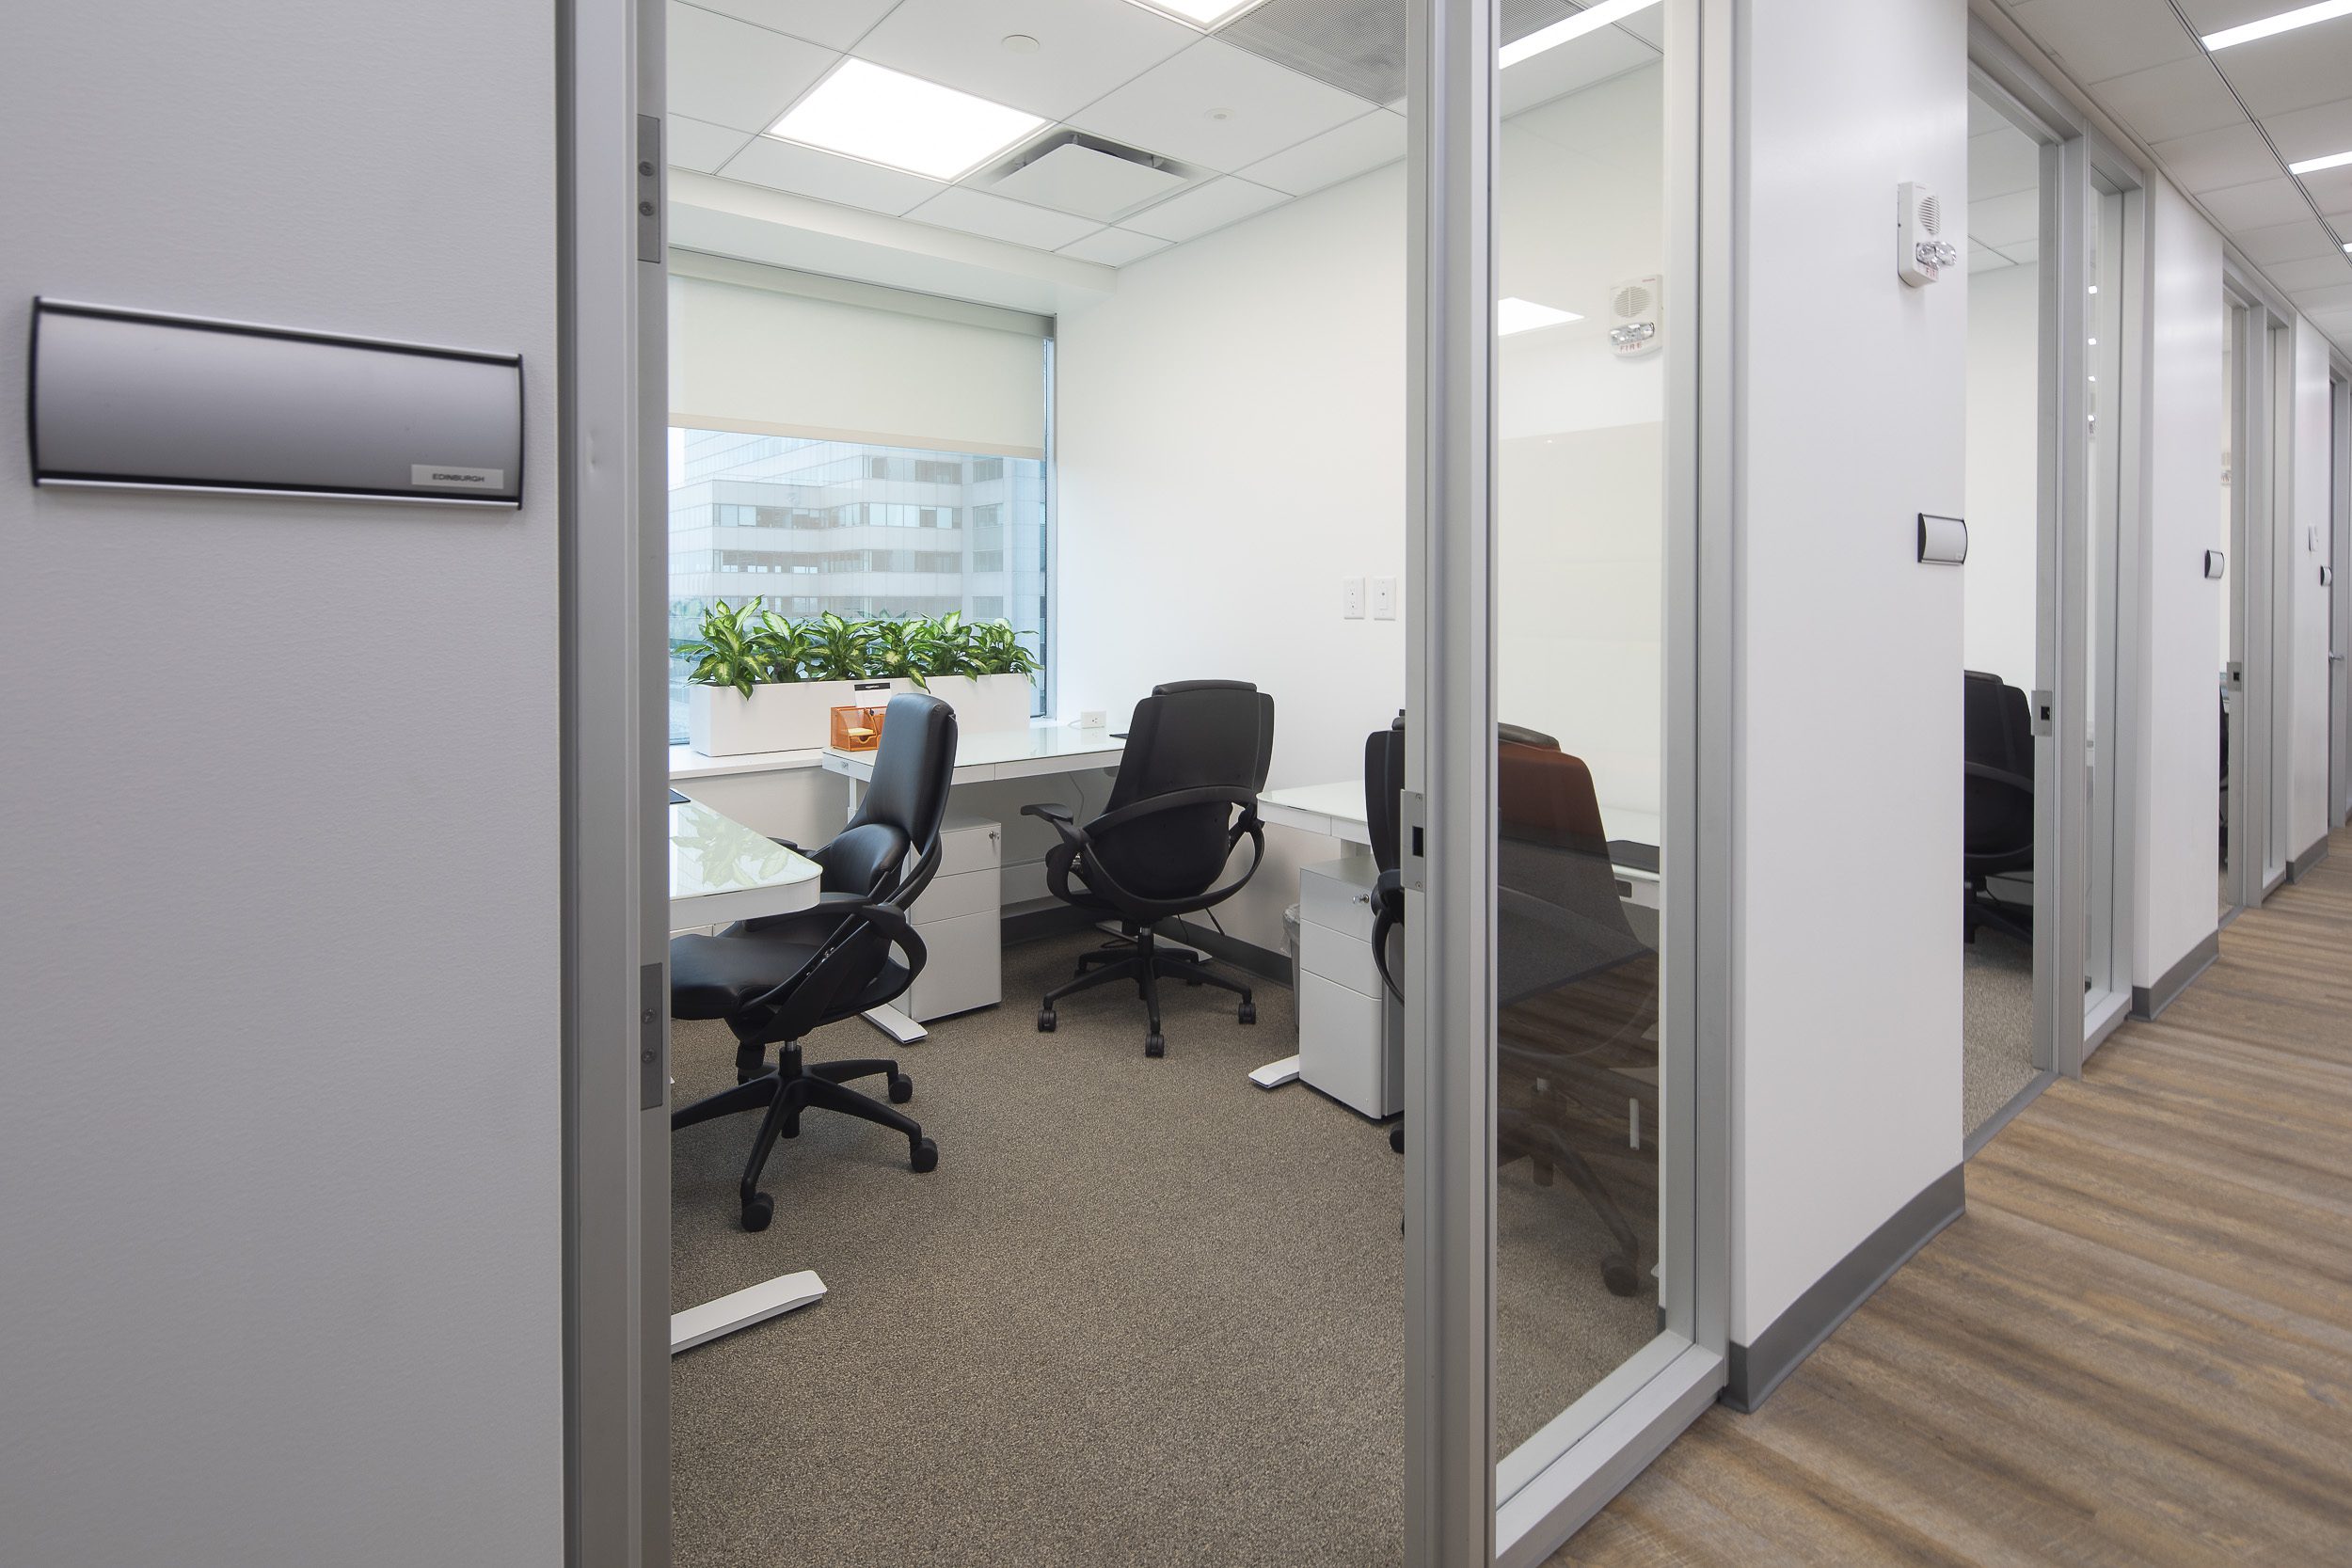 Book professional private office space rentals to conduct your business more efficiently